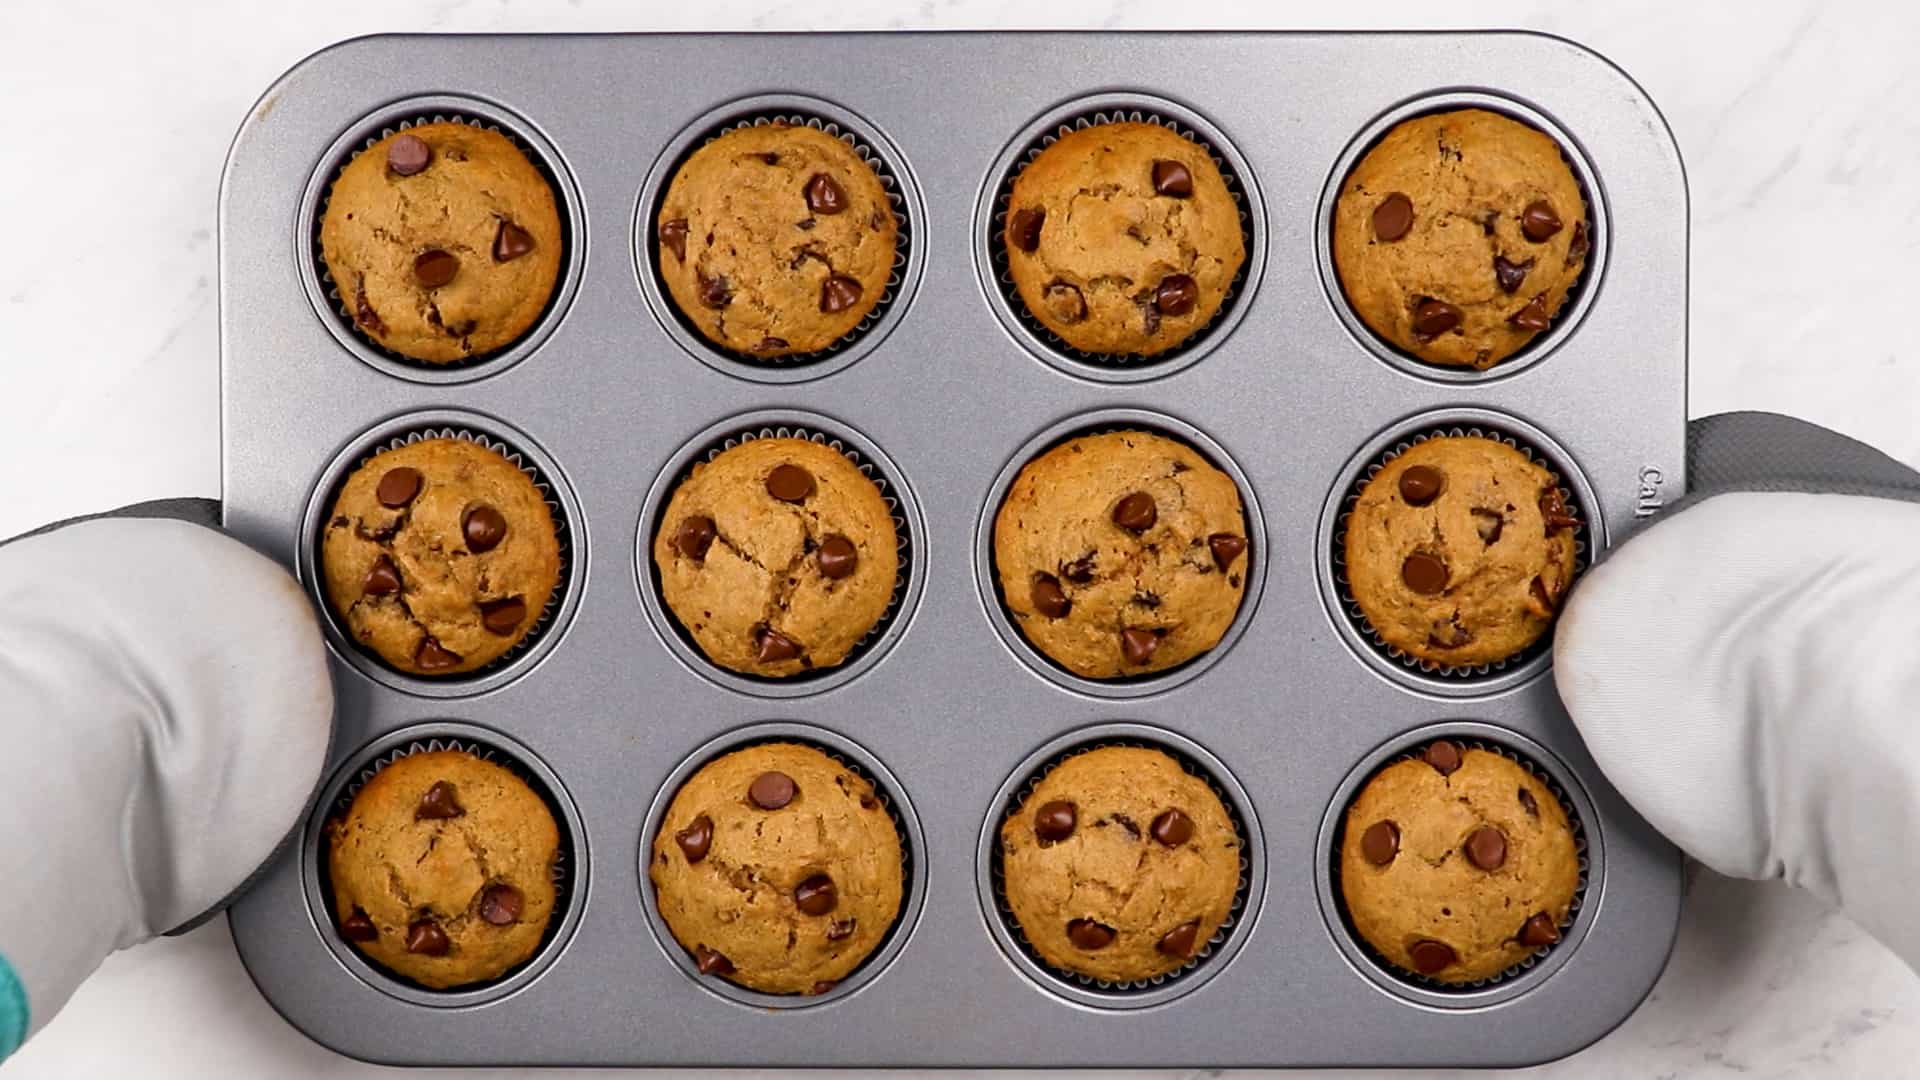 Baked Healthy Banana Chocolate Chip Muffins in a baking pan.